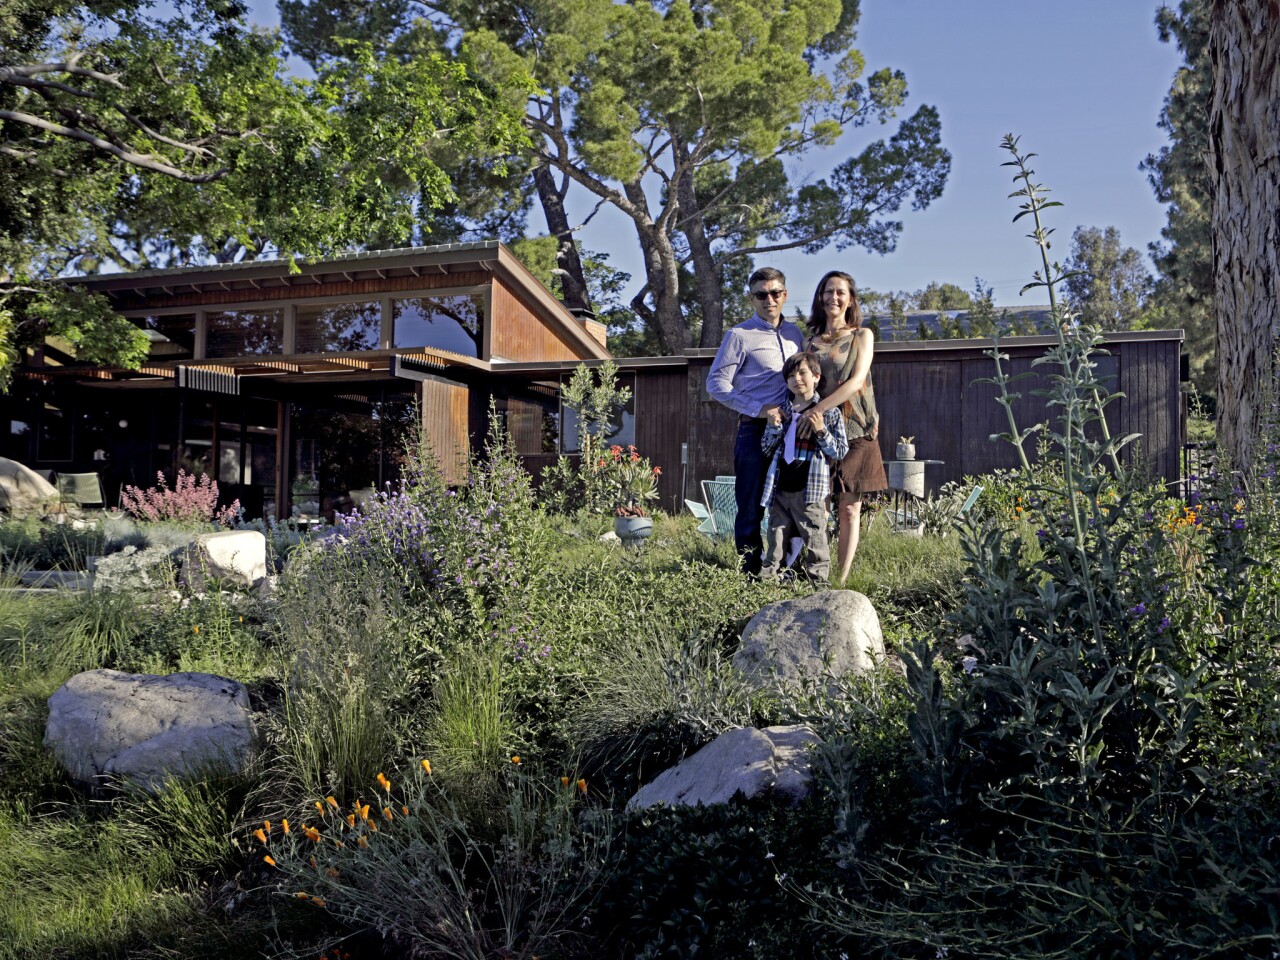 For 20 years, landscape designers Cassy and Kirk Aoyagi have proselytized the benefits of California native plants. Their personal garden in Tujunga is their most persuasive argument.